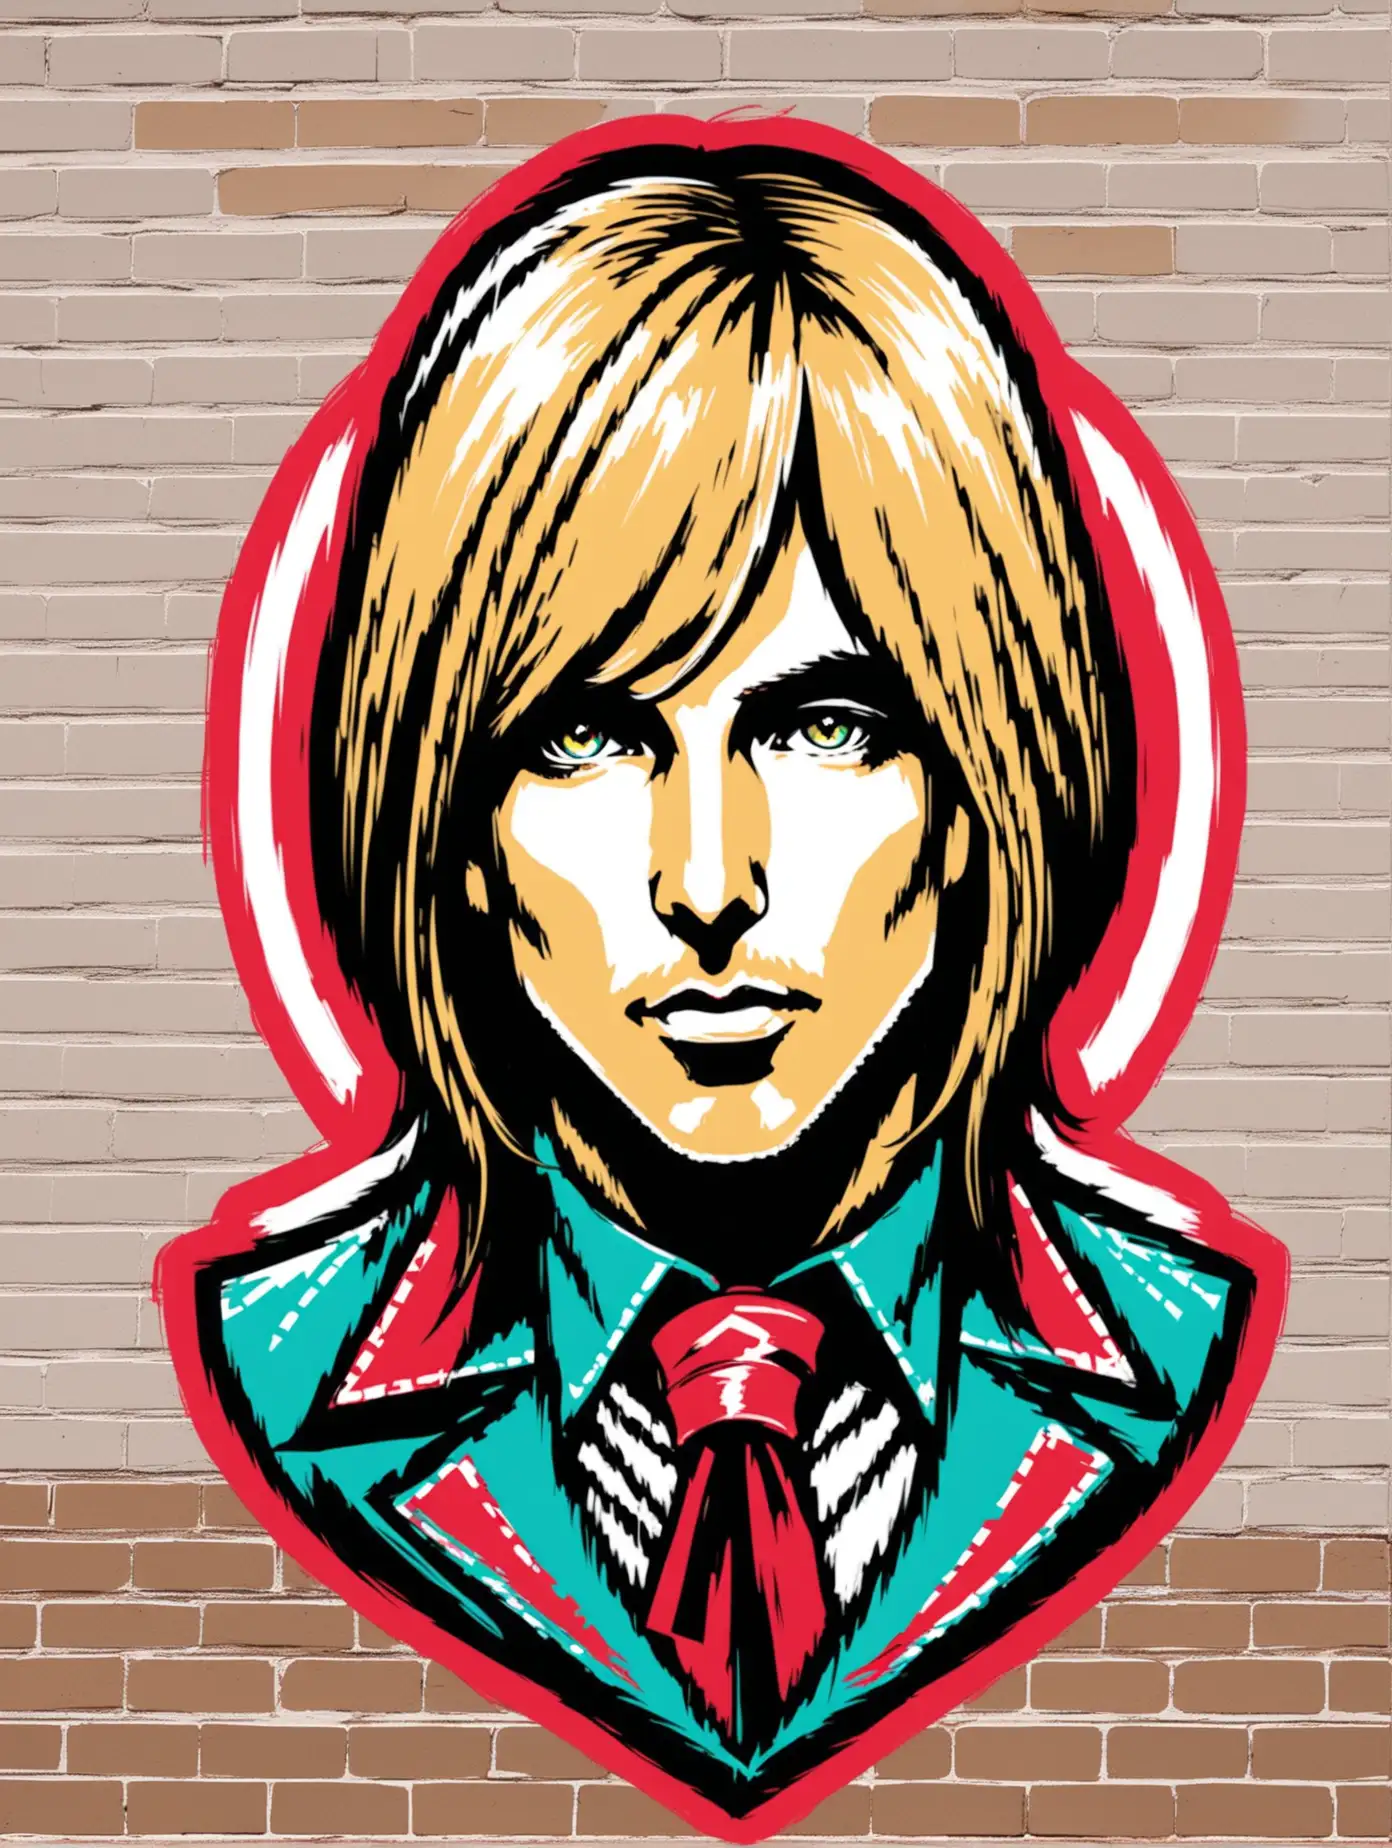 Tom Petty - bust and head only -  illustrated in a street art style